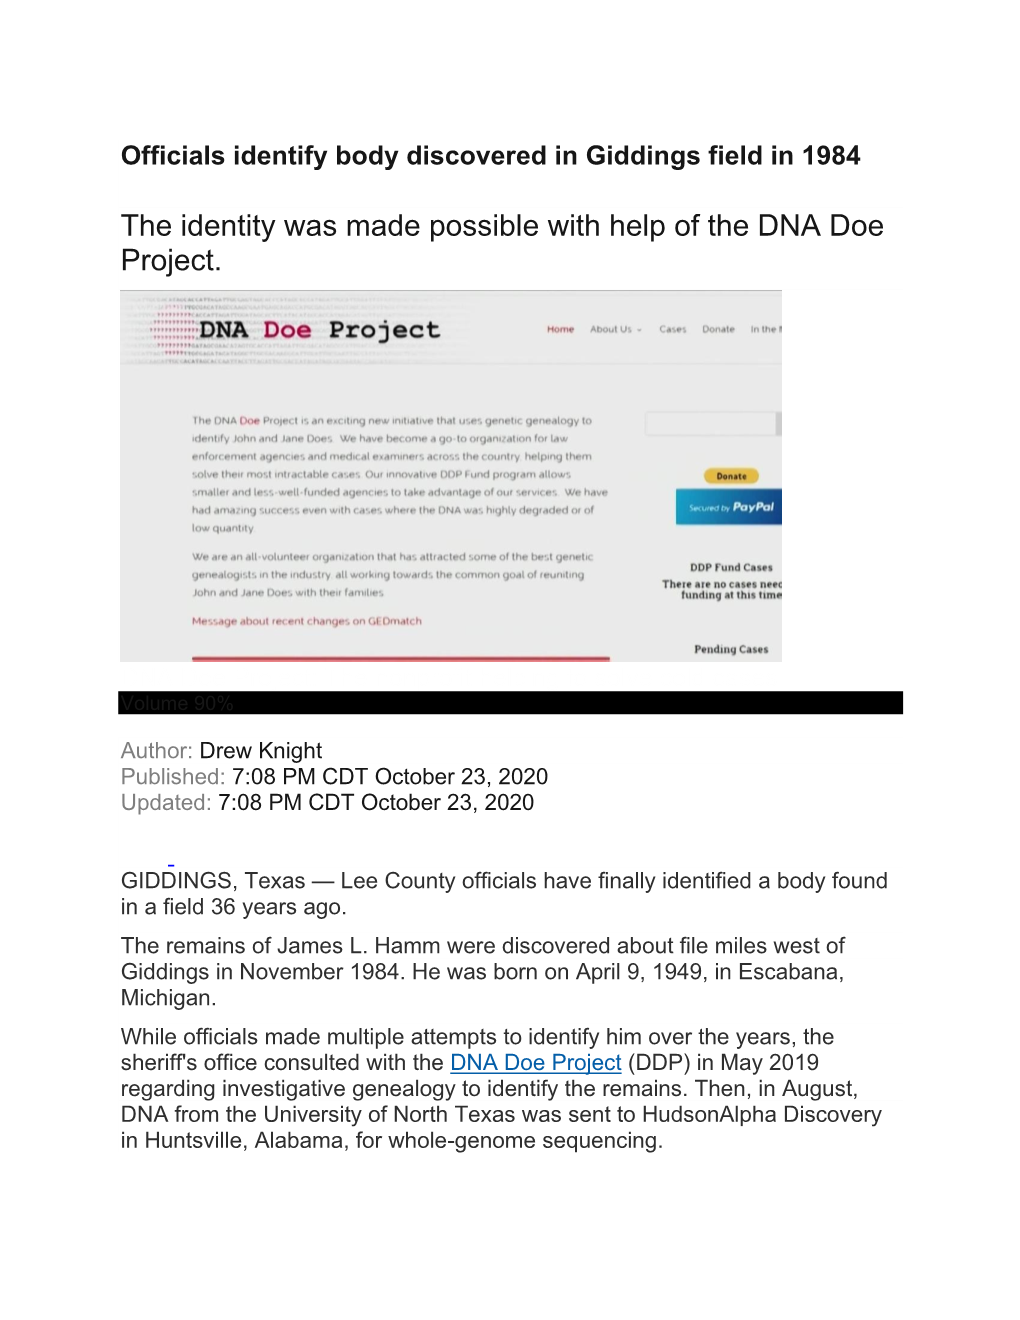 The Identity Was Made Possible with Help of the DNA Doe Project